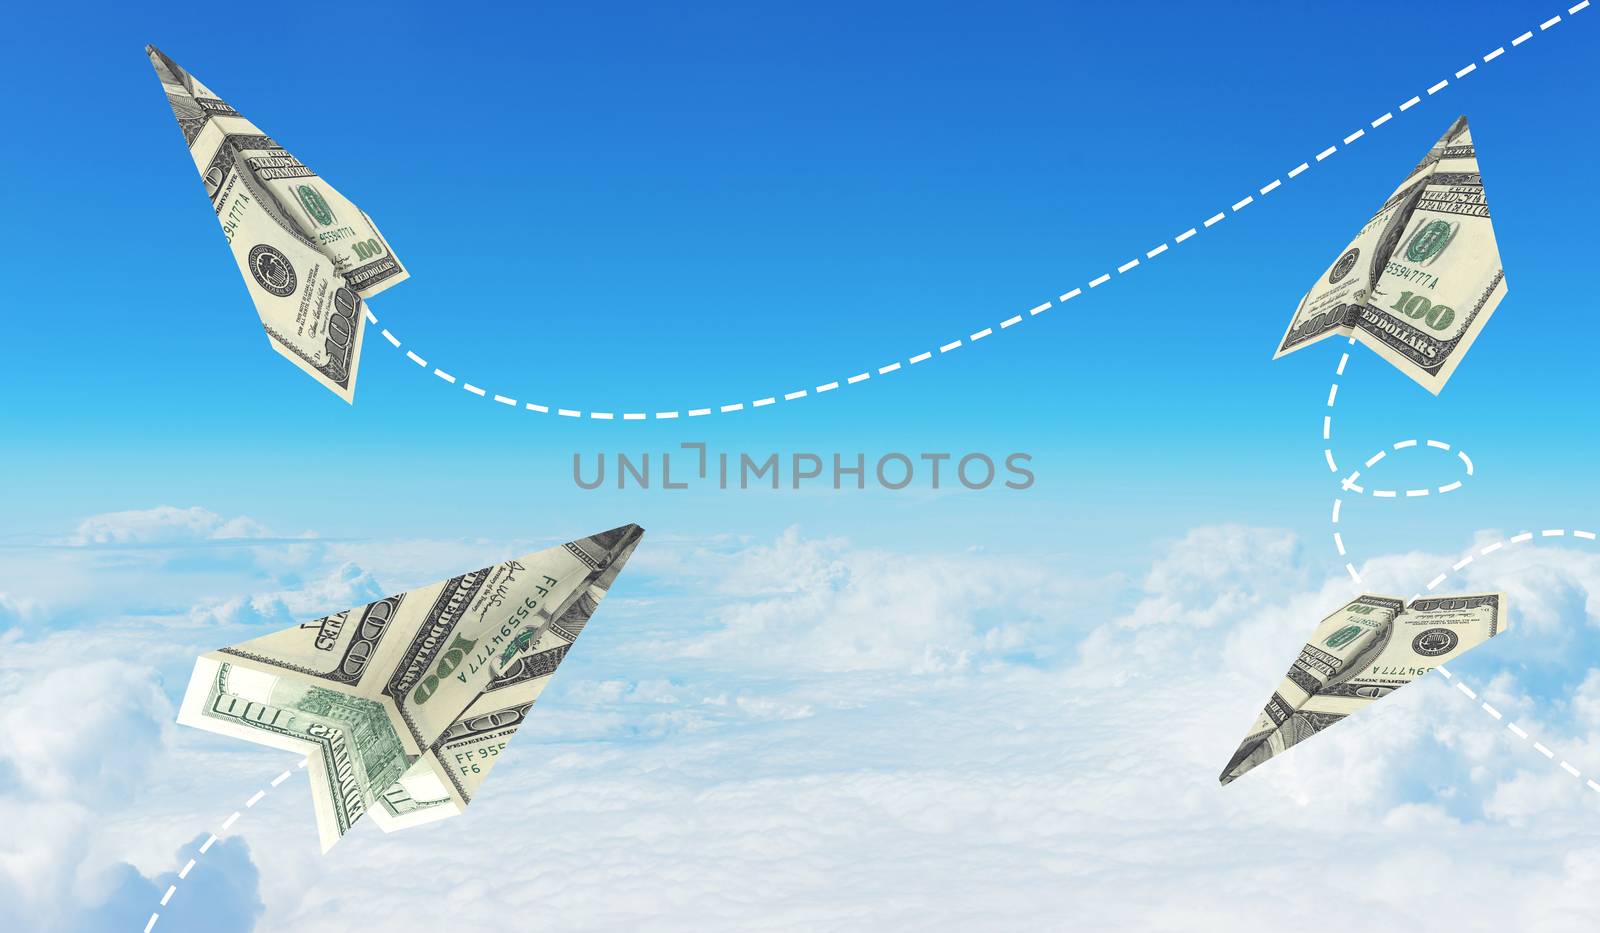 Paper airplanes made of hundred dollar bills by cherezoff